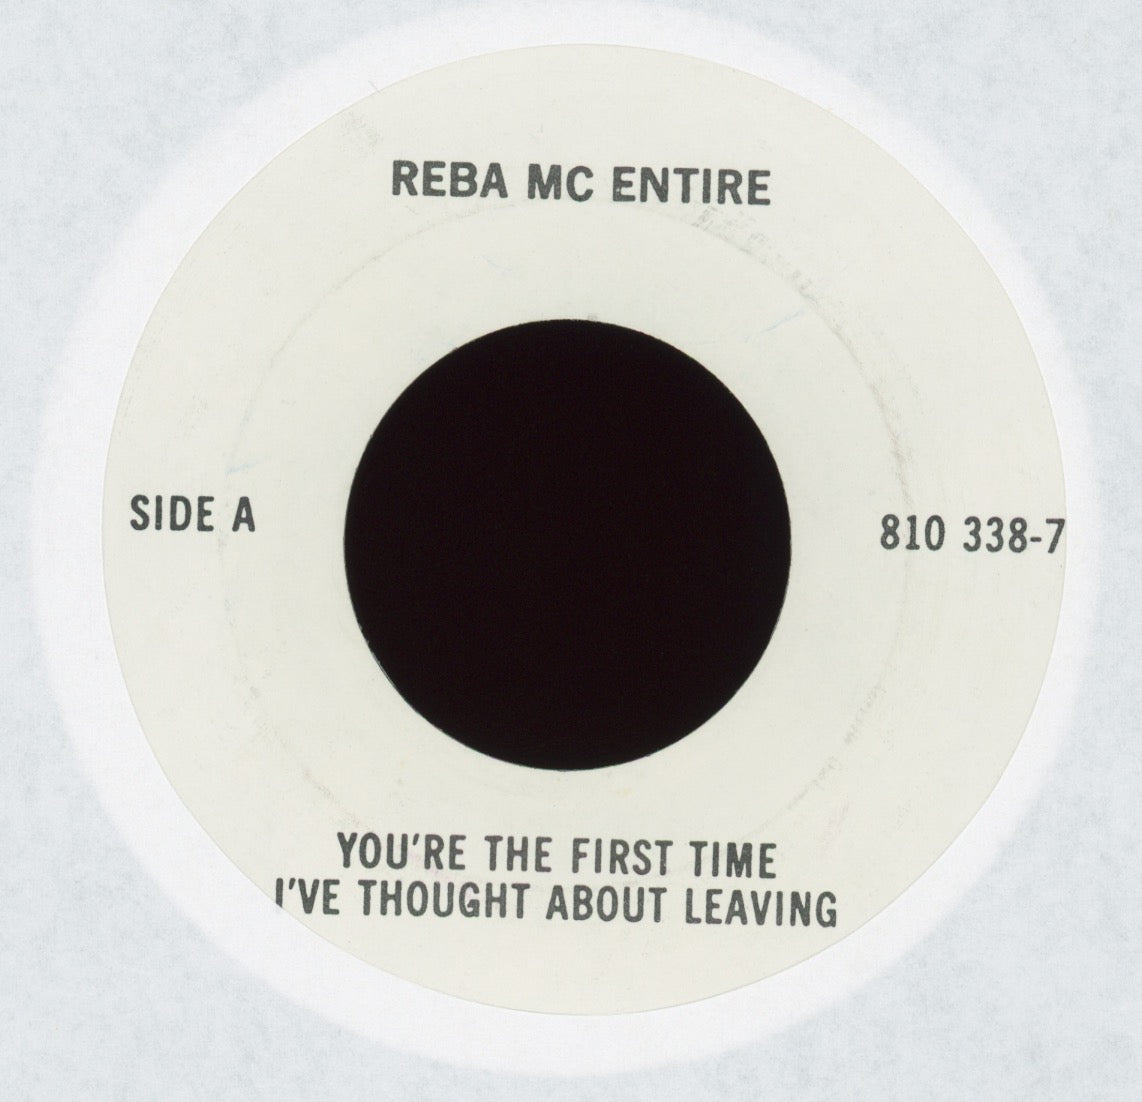 Reba McEntire - You're The First Time I've Thought About Leaving Test Pressing